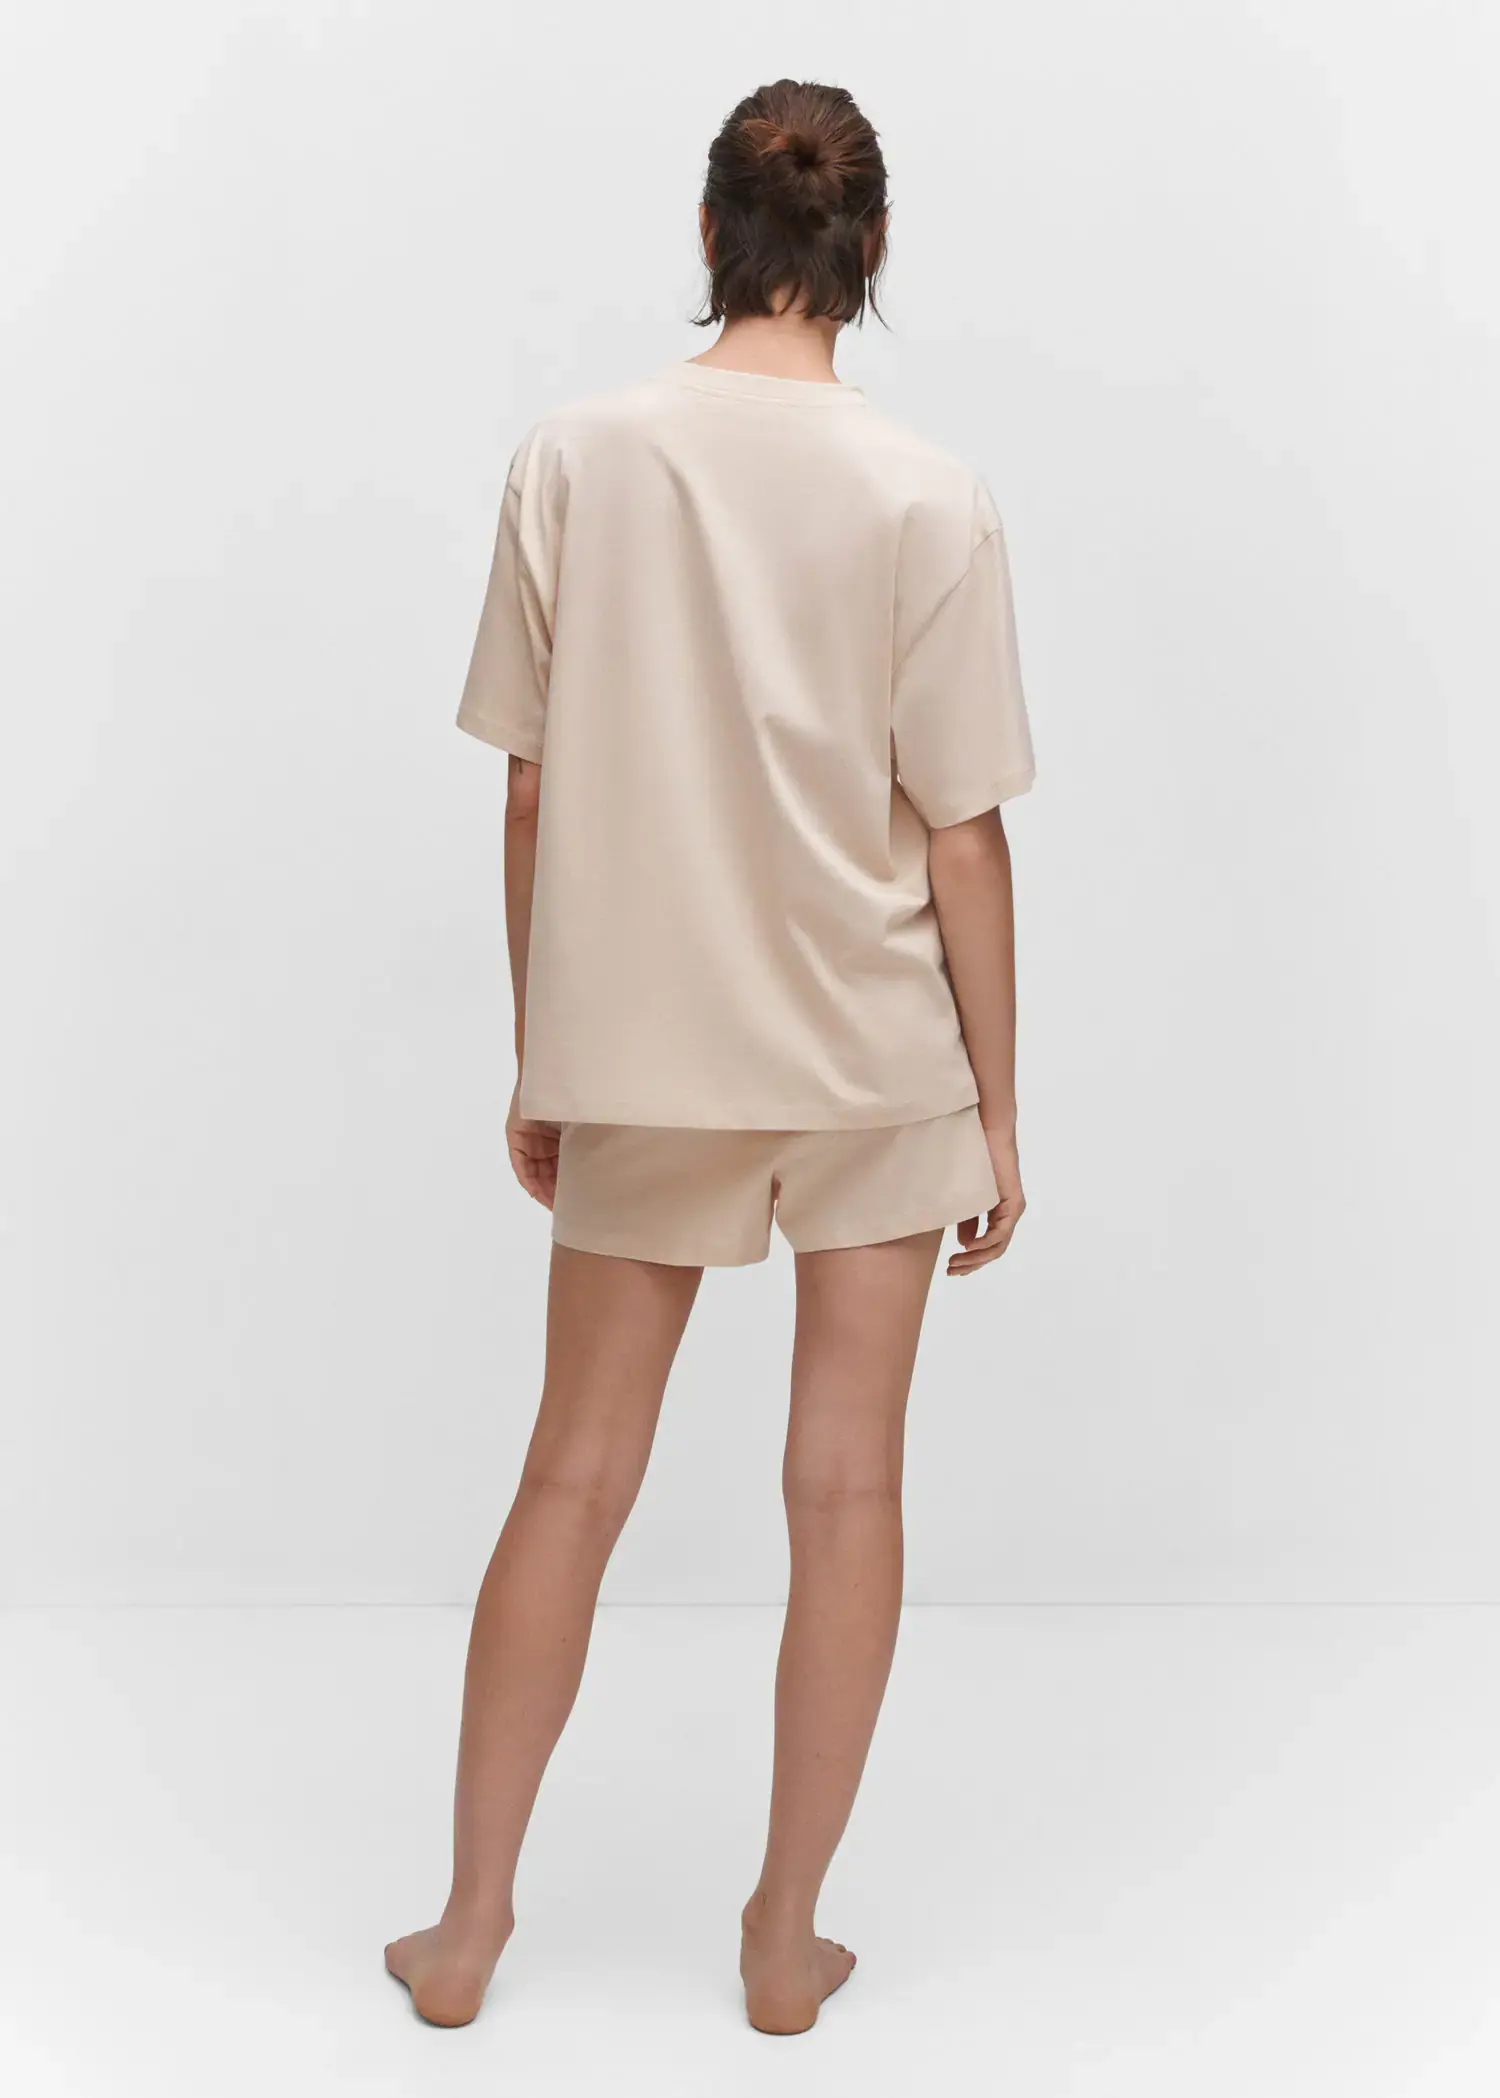 Mango Short cotton pyjamas. a person standing in a room wearing a beige outfit. 